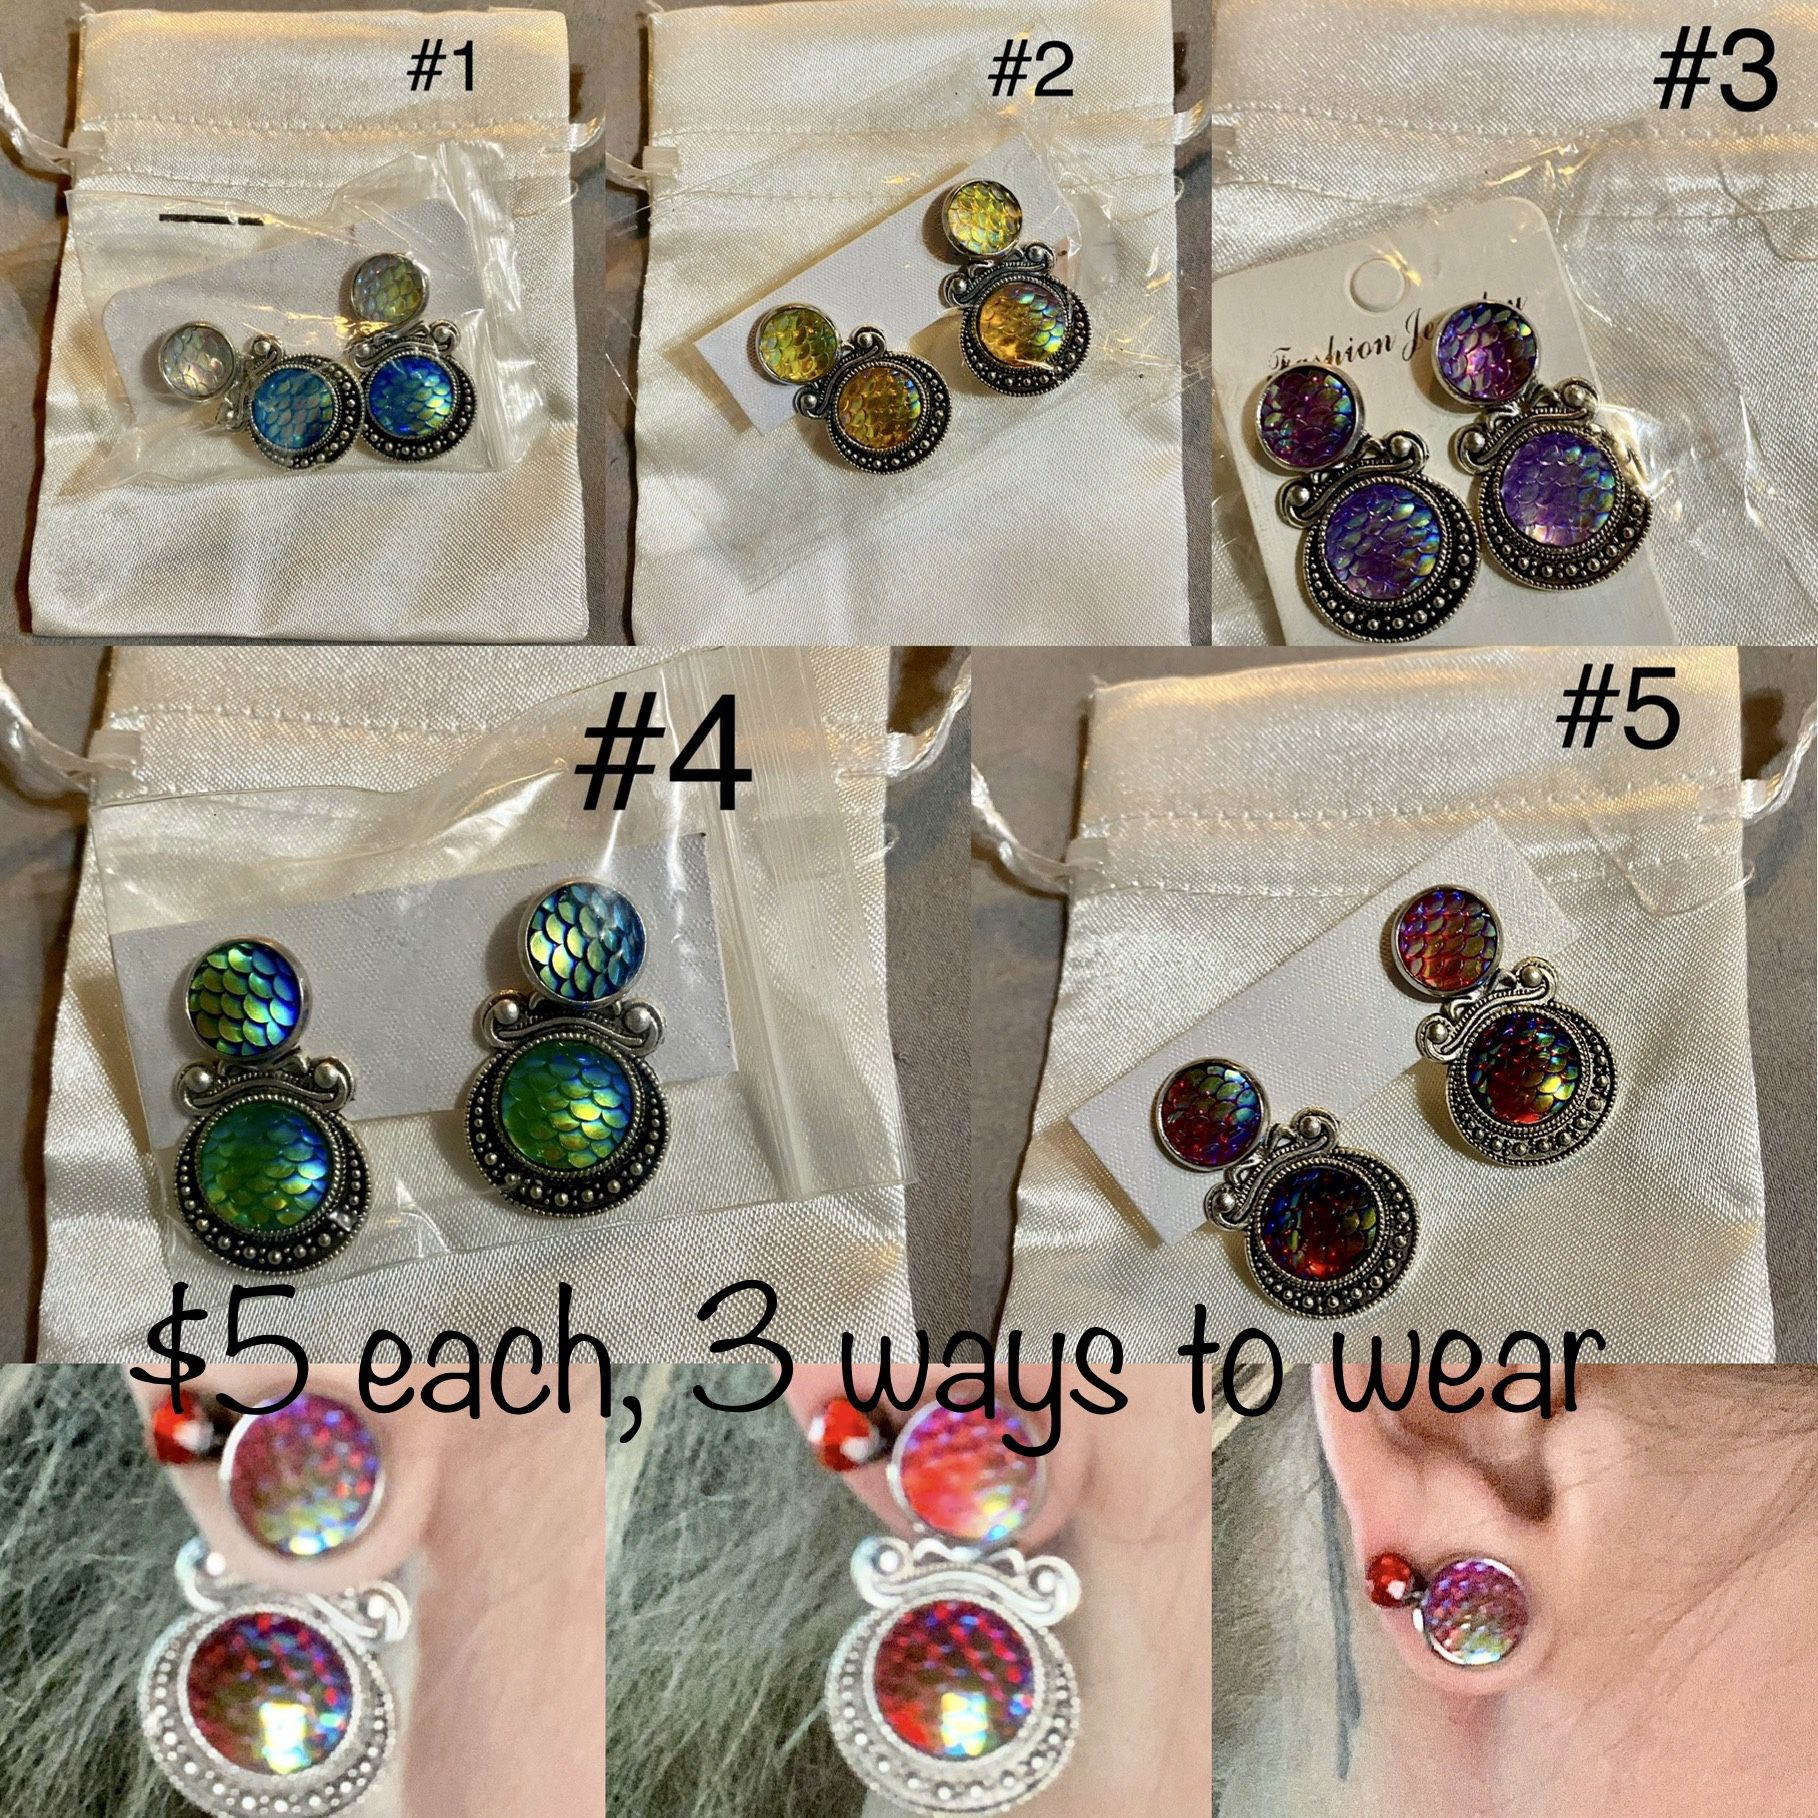 Mermaid scale earrings $5 each. Can be worn 3 different ways